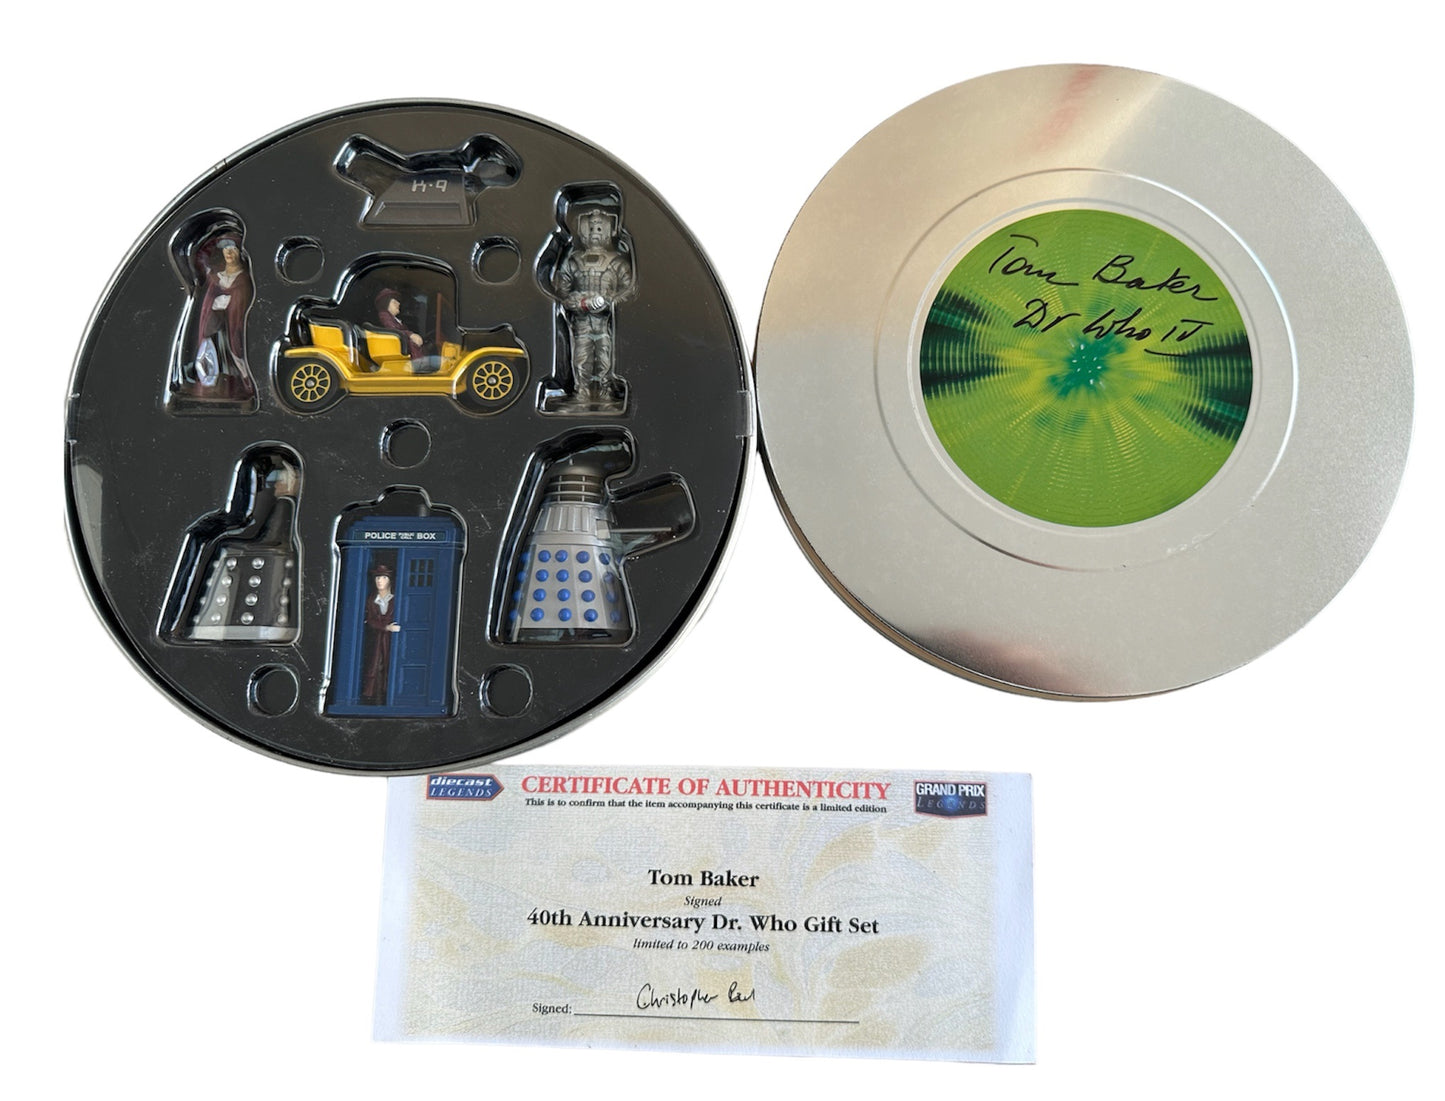 Vintage 2003 Corgi Doctor Dr Who 40th Anniversary 7 Piece Die-Cast Gift Set No. TY96203 - Autographed By Tom Baker - Complete With COA - Mint Condition